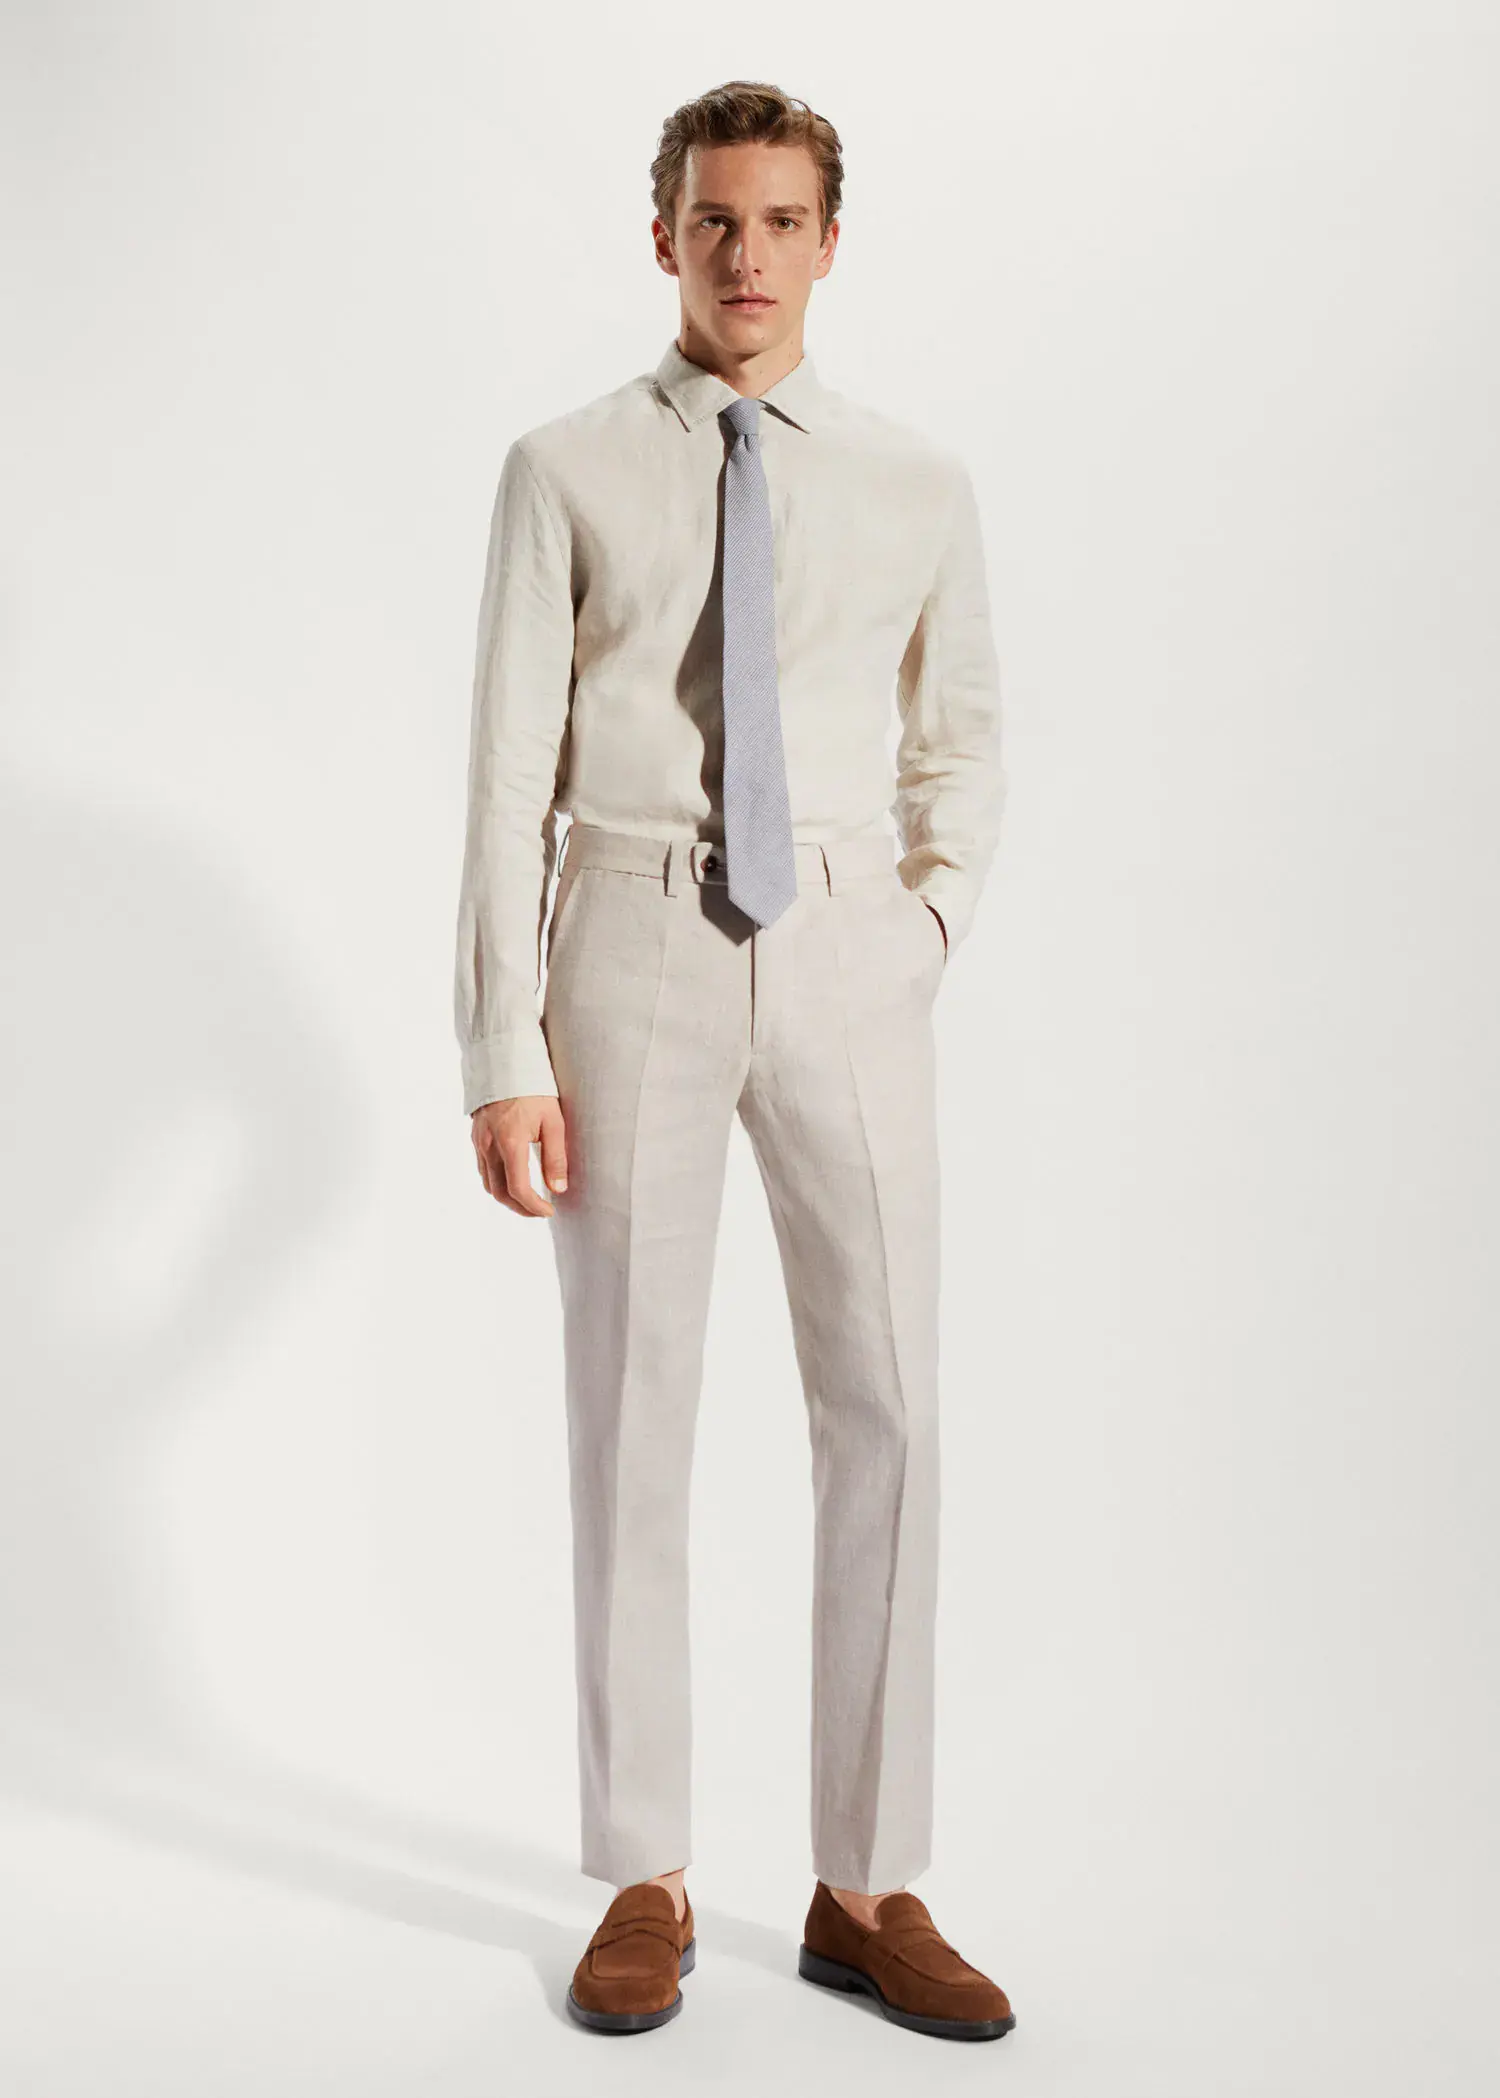 Mango 100% linen suit trousers. a man wearing a suit and tie standing in front of a wall. 